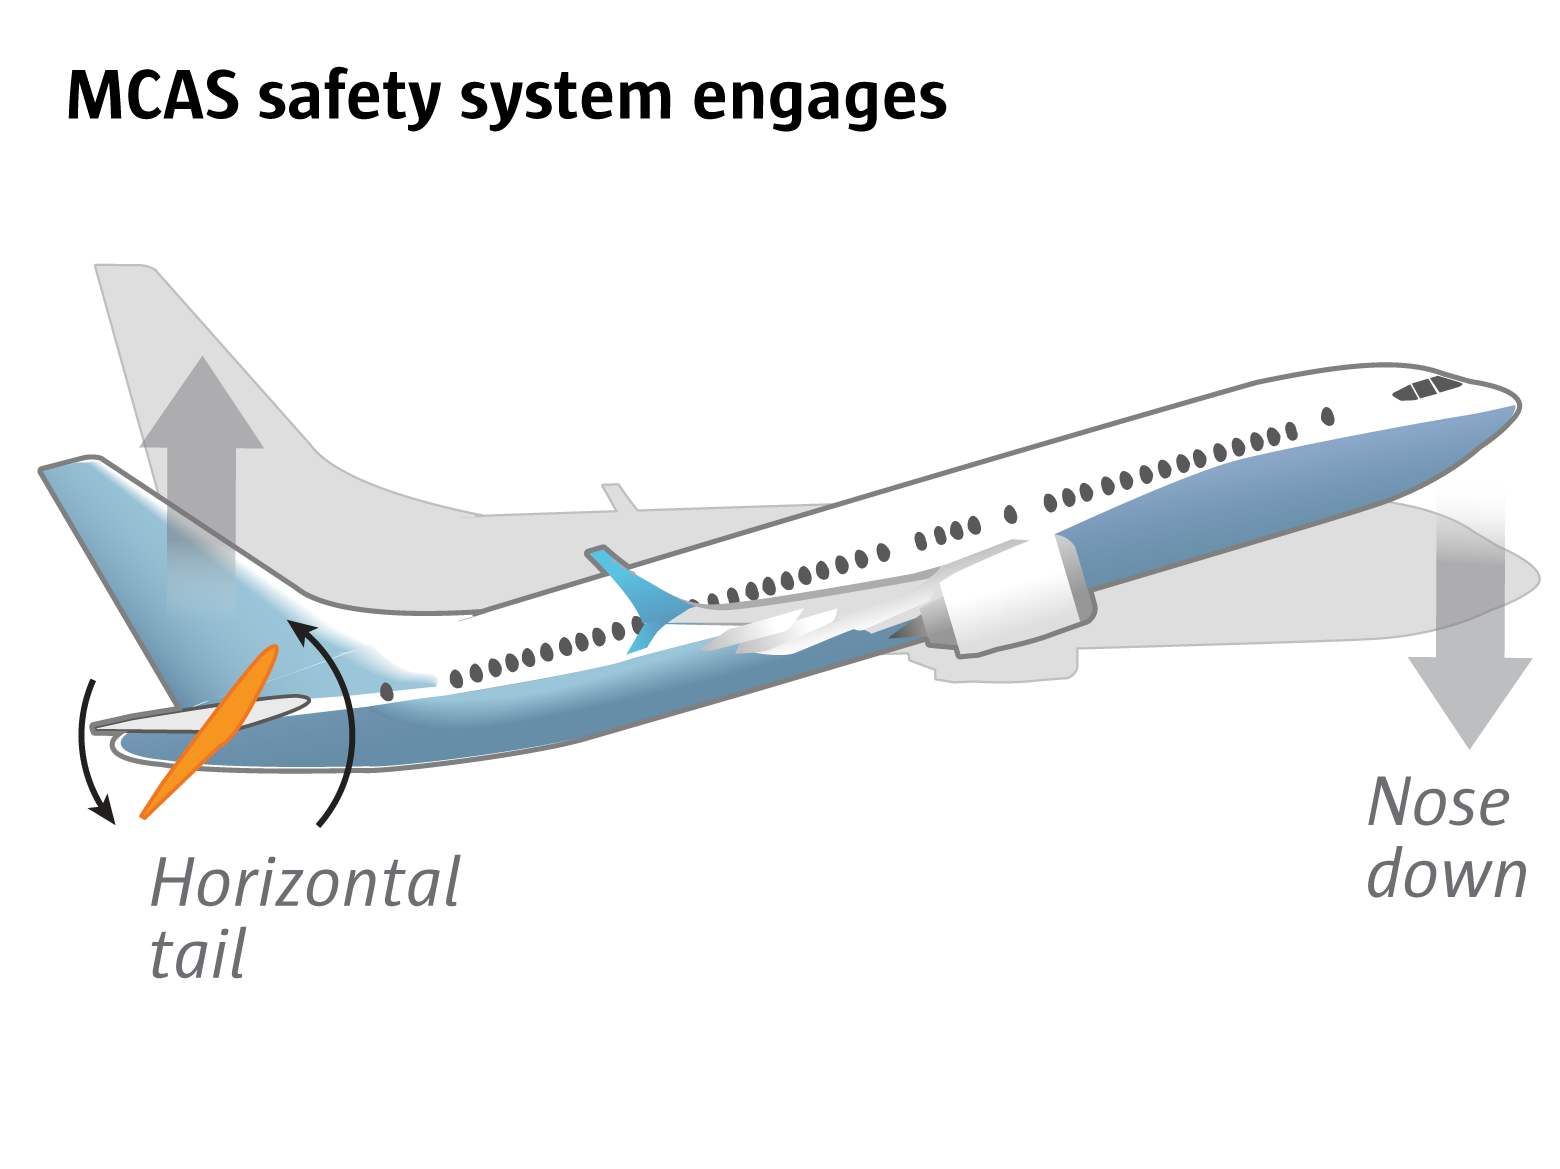 How the MCAS system works in the Boing 737 Max